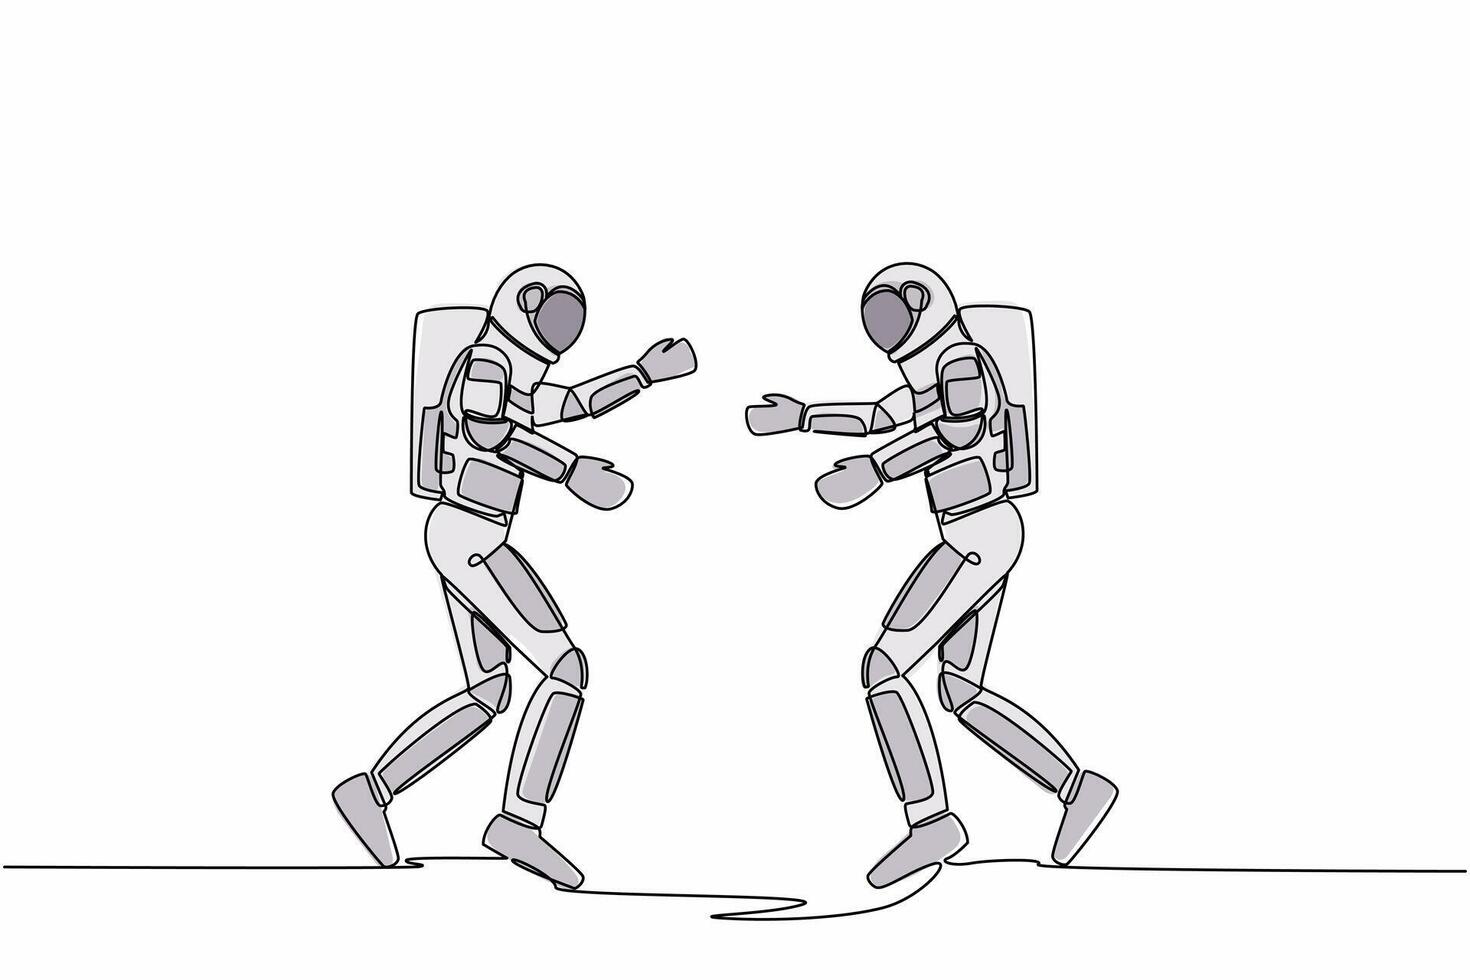 Single one line drawing two young astronaut running face to face while getting ready to hug. Break a happiness between two friends. Cosmic galaxy space. Continuous line draw design vector illustration